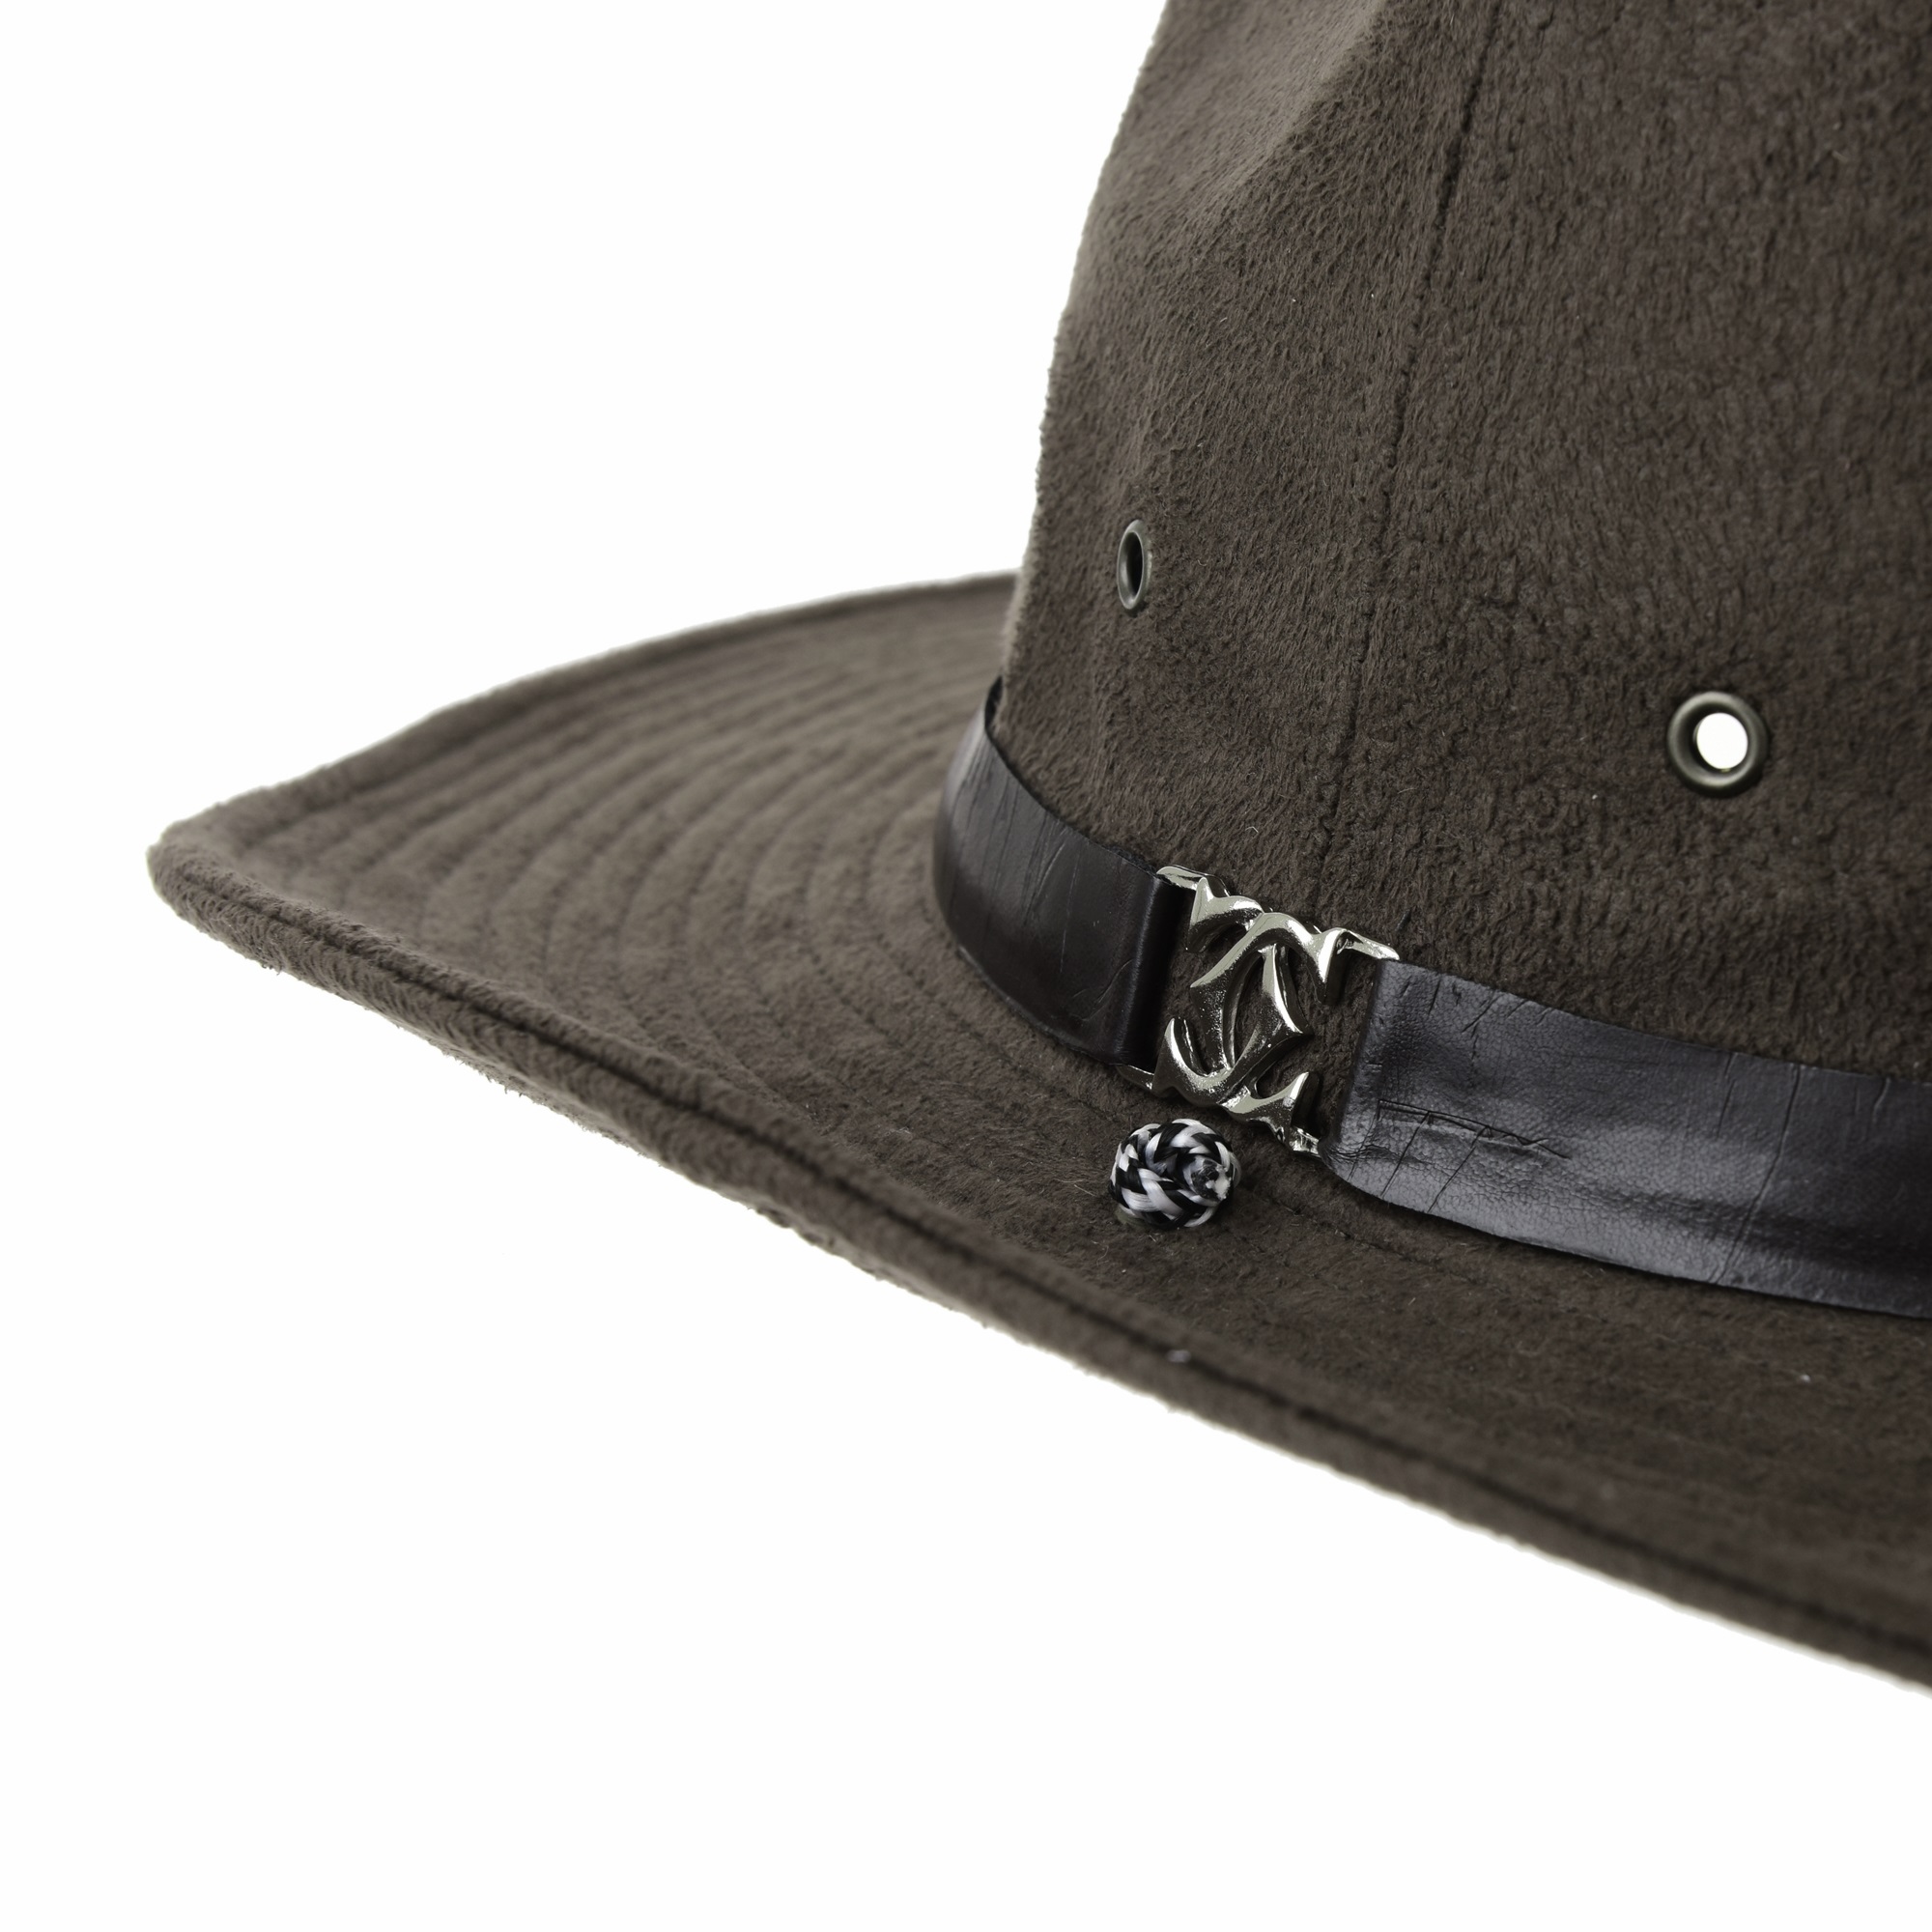 WITHMOONS Suede Indiana Jones Hat Outback Hat Fedora With Cord CD8858 (Brown) - image 4 of 5